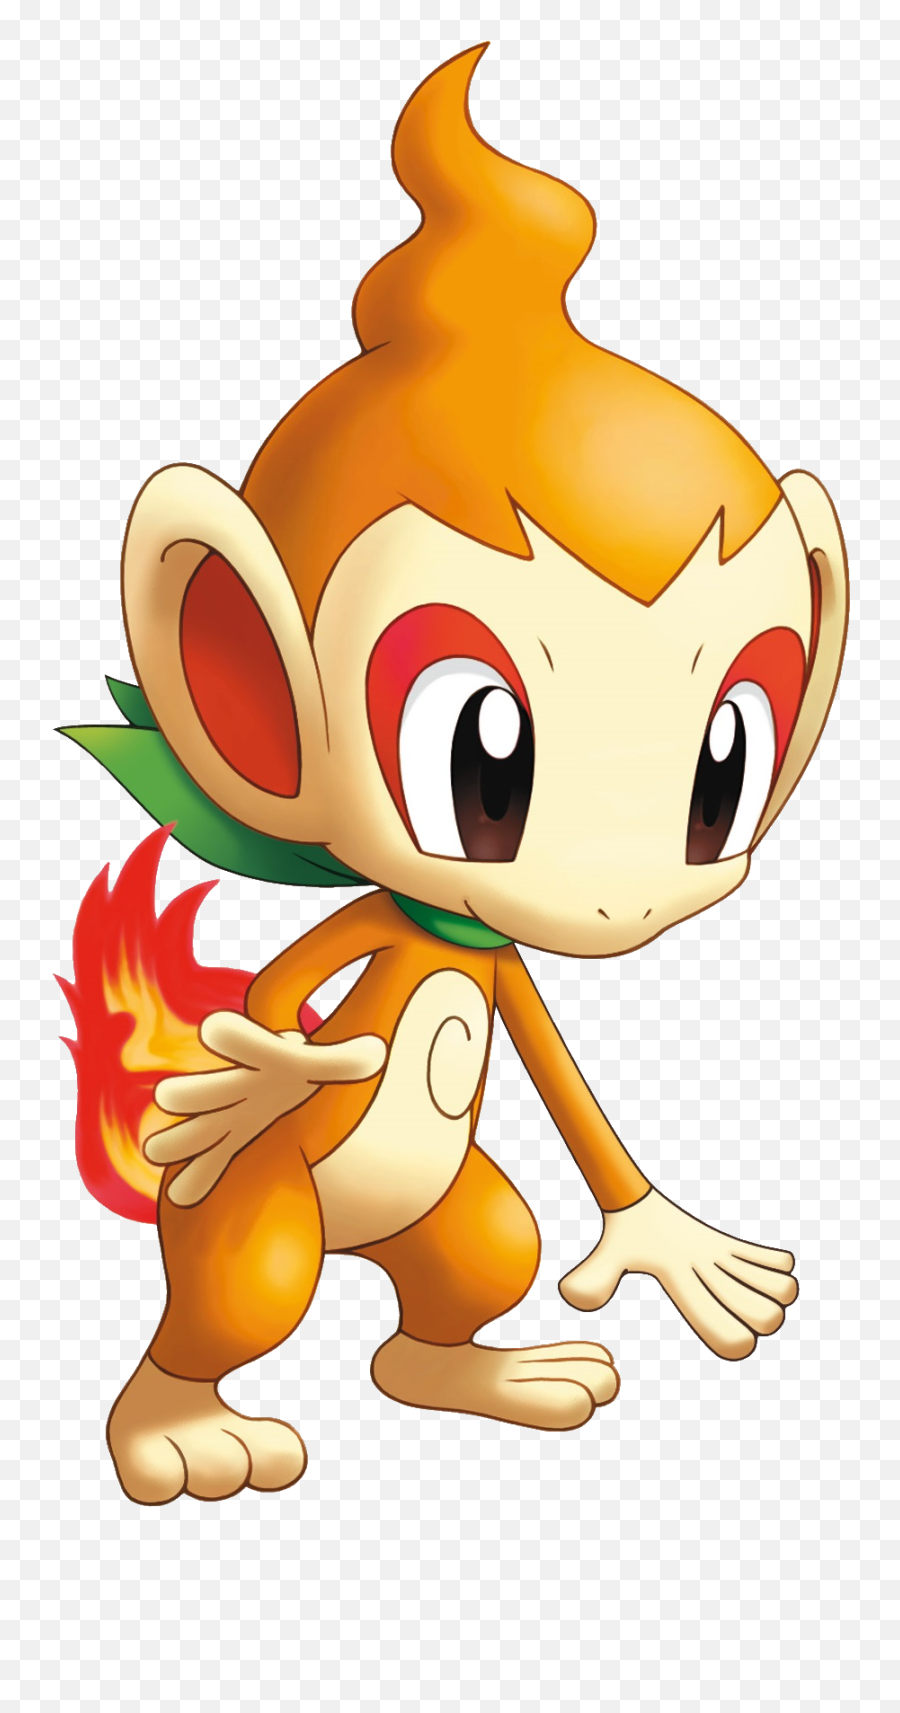 Chimchar Pokemon Mystery Dungeon Explorers Of Sky From The - Chimchar Pokemon Emoji,Artist That Draw Emotions As Pokemon